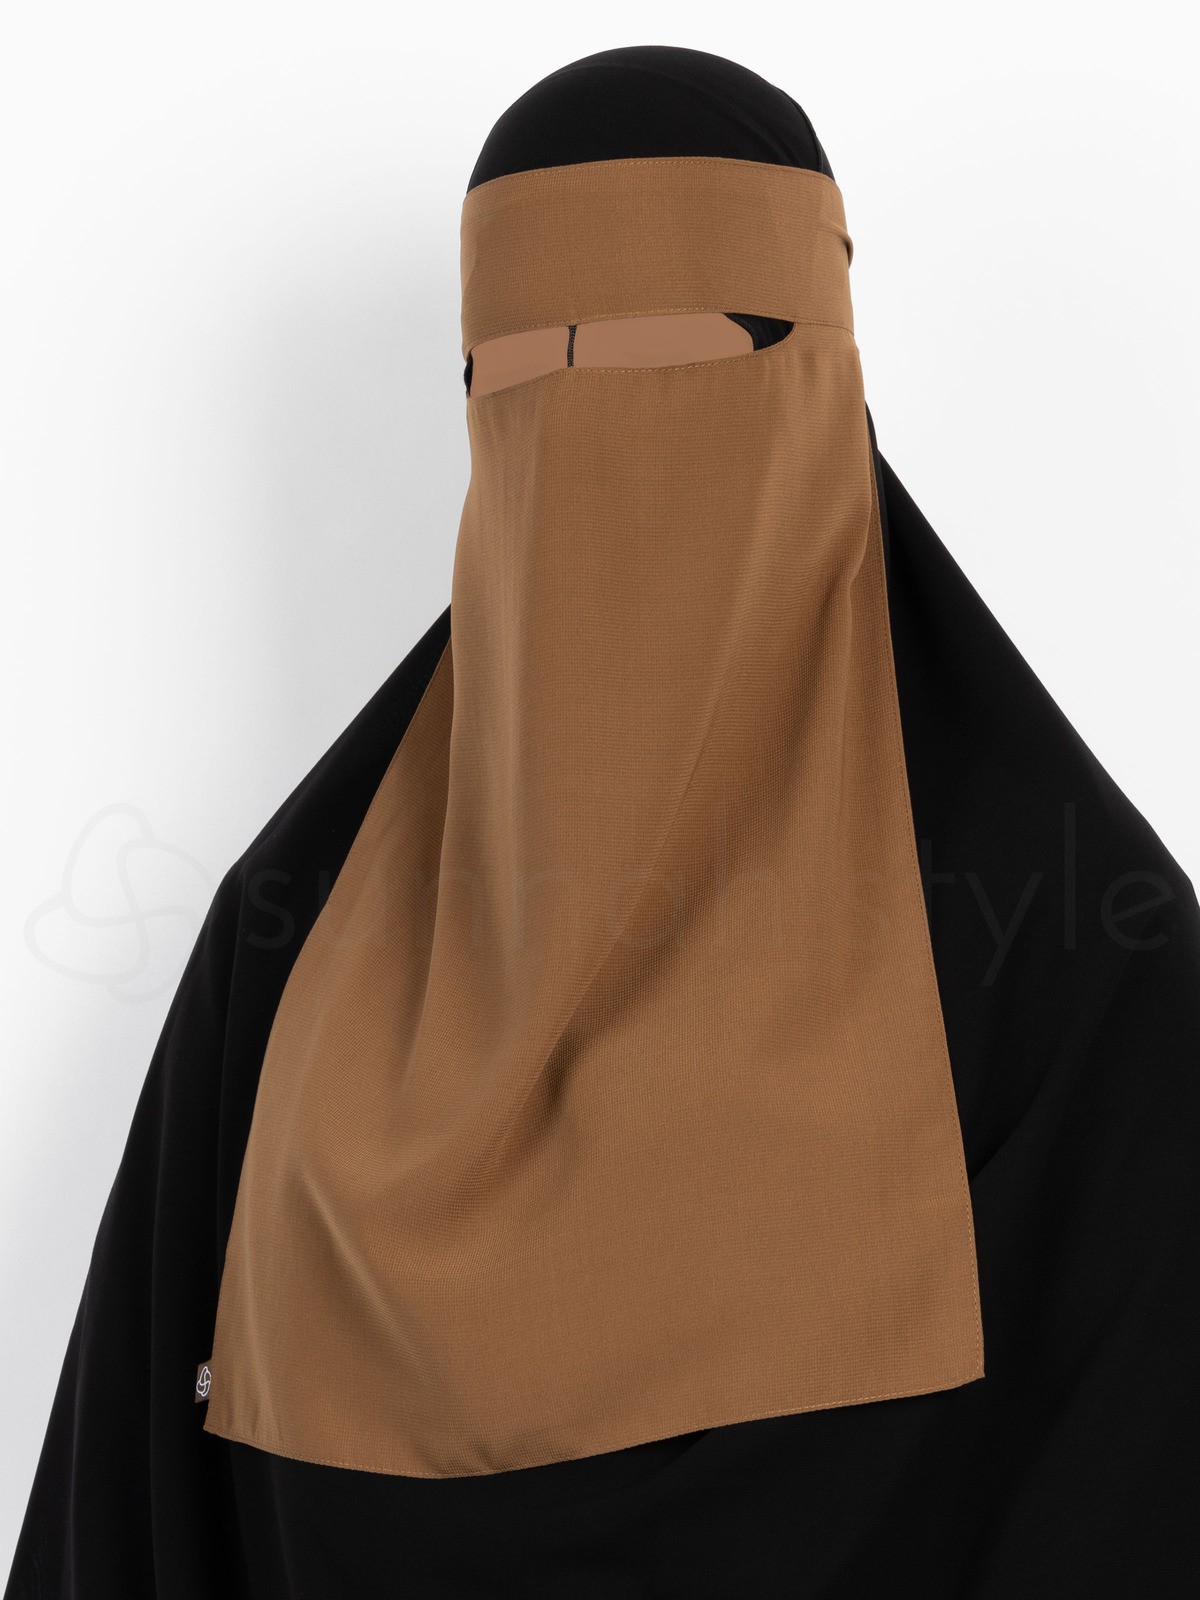 Sunnah Style - One Layer Niqab /w Nose String (Caramel)